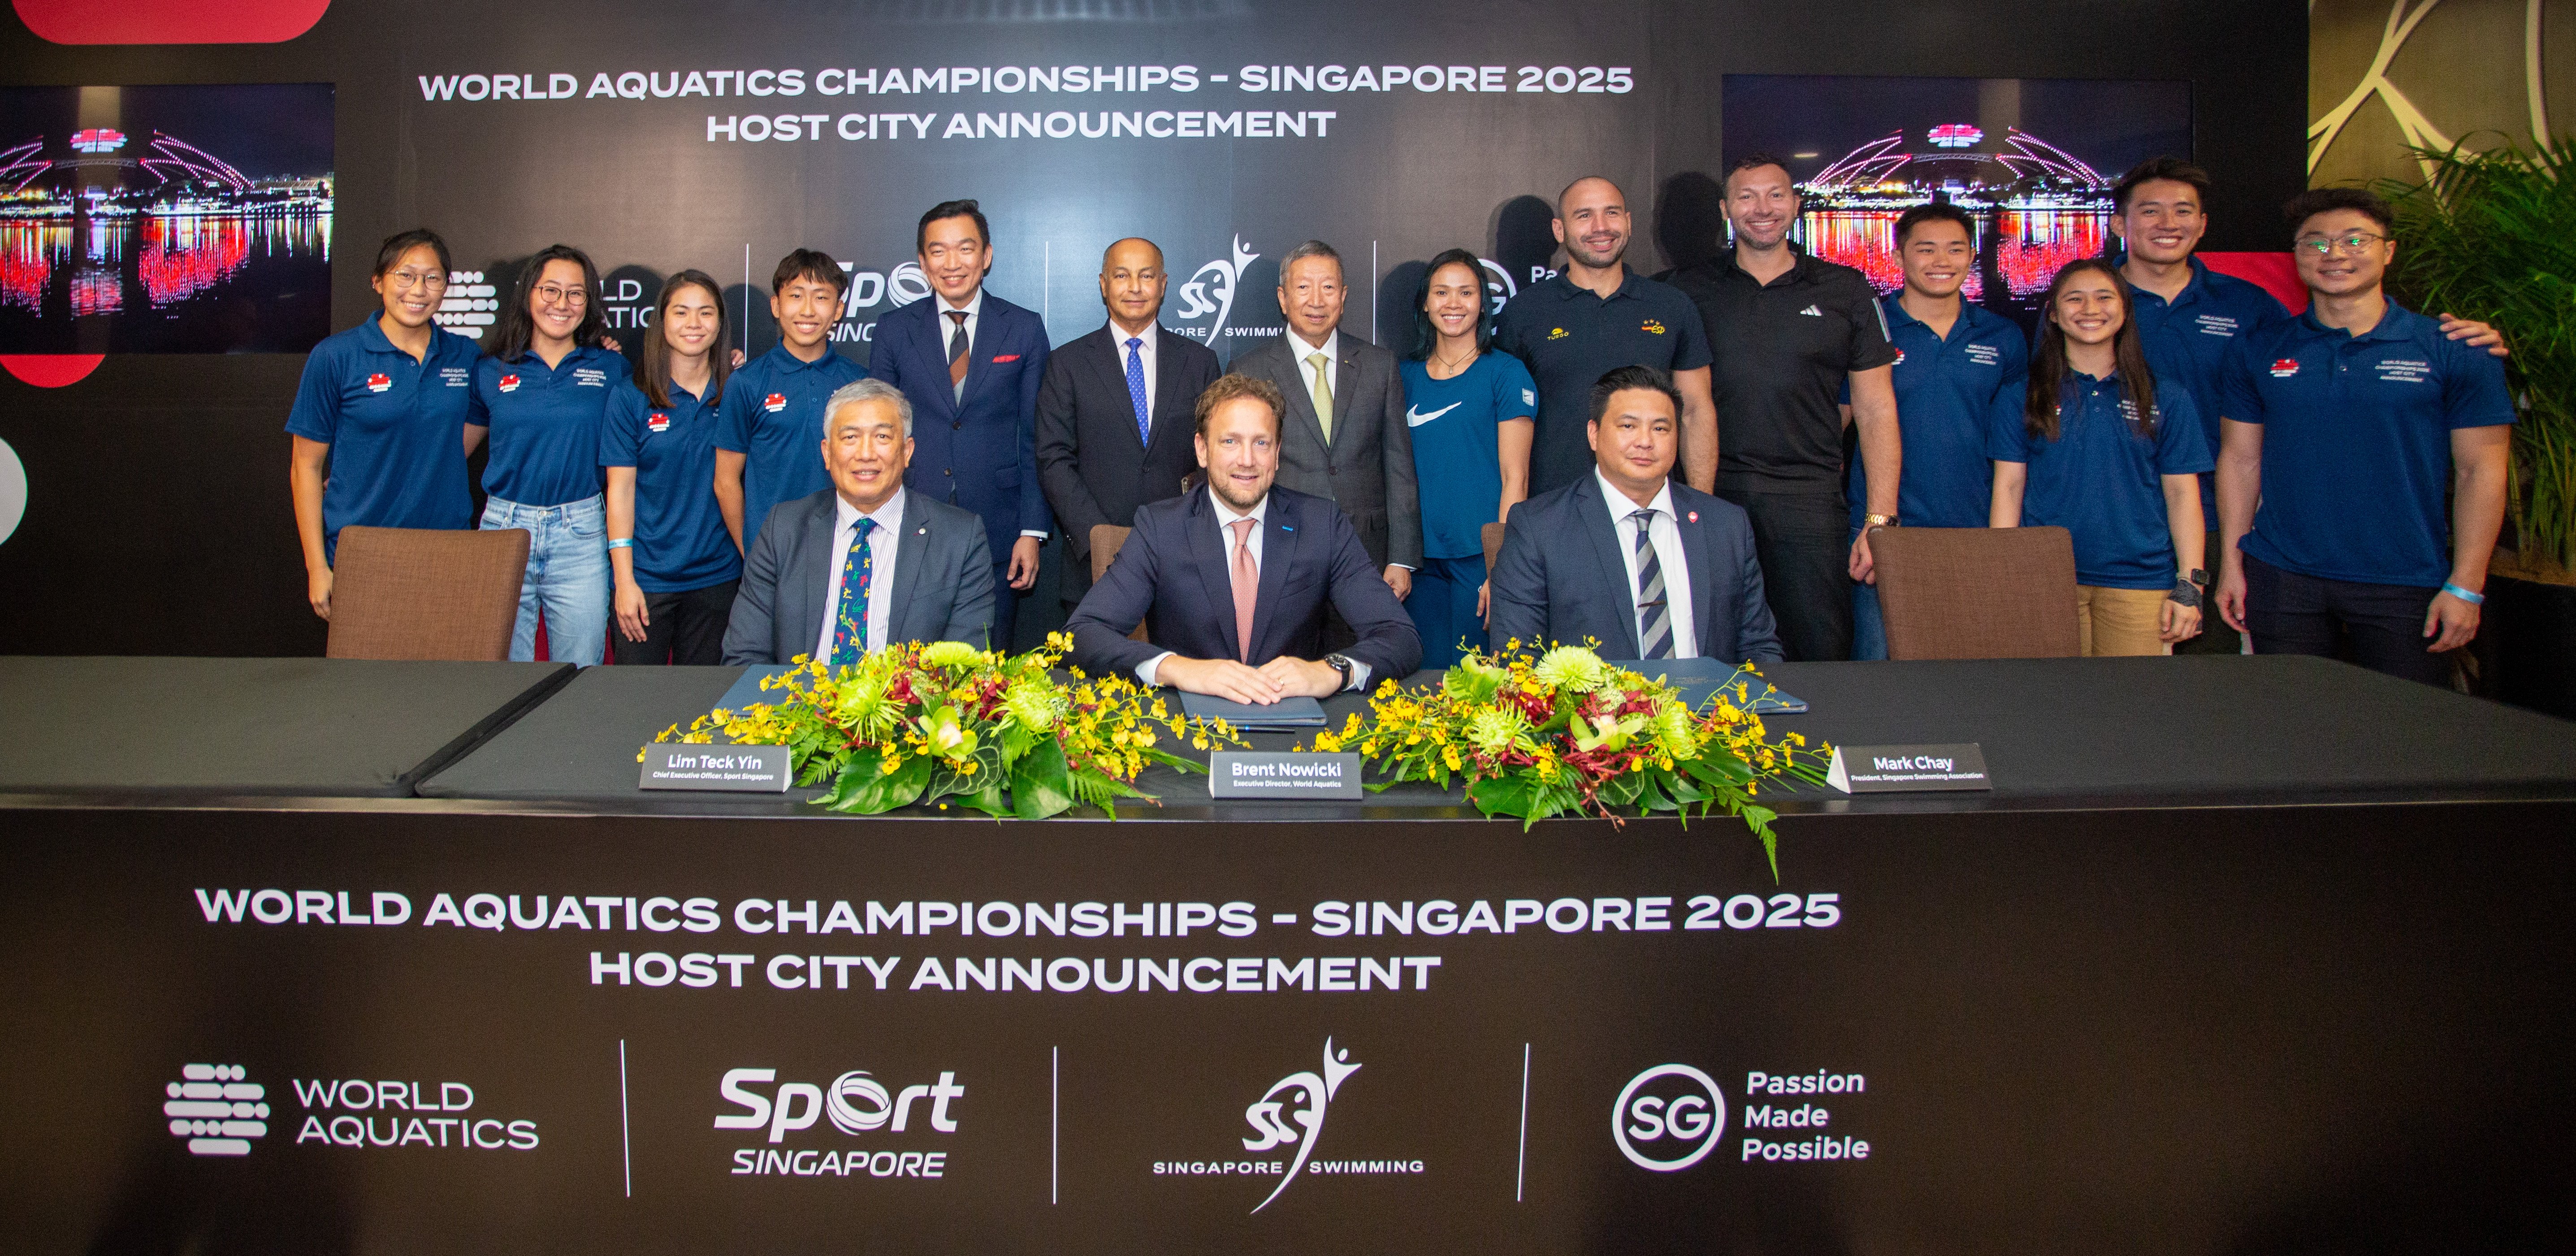 Team Singapore and International Athletes with VIP Signatories and Witnesses at the World Aquatics Championships Singapore 2025 Host City Announcement Photo Credit - Ng Chrong Meng